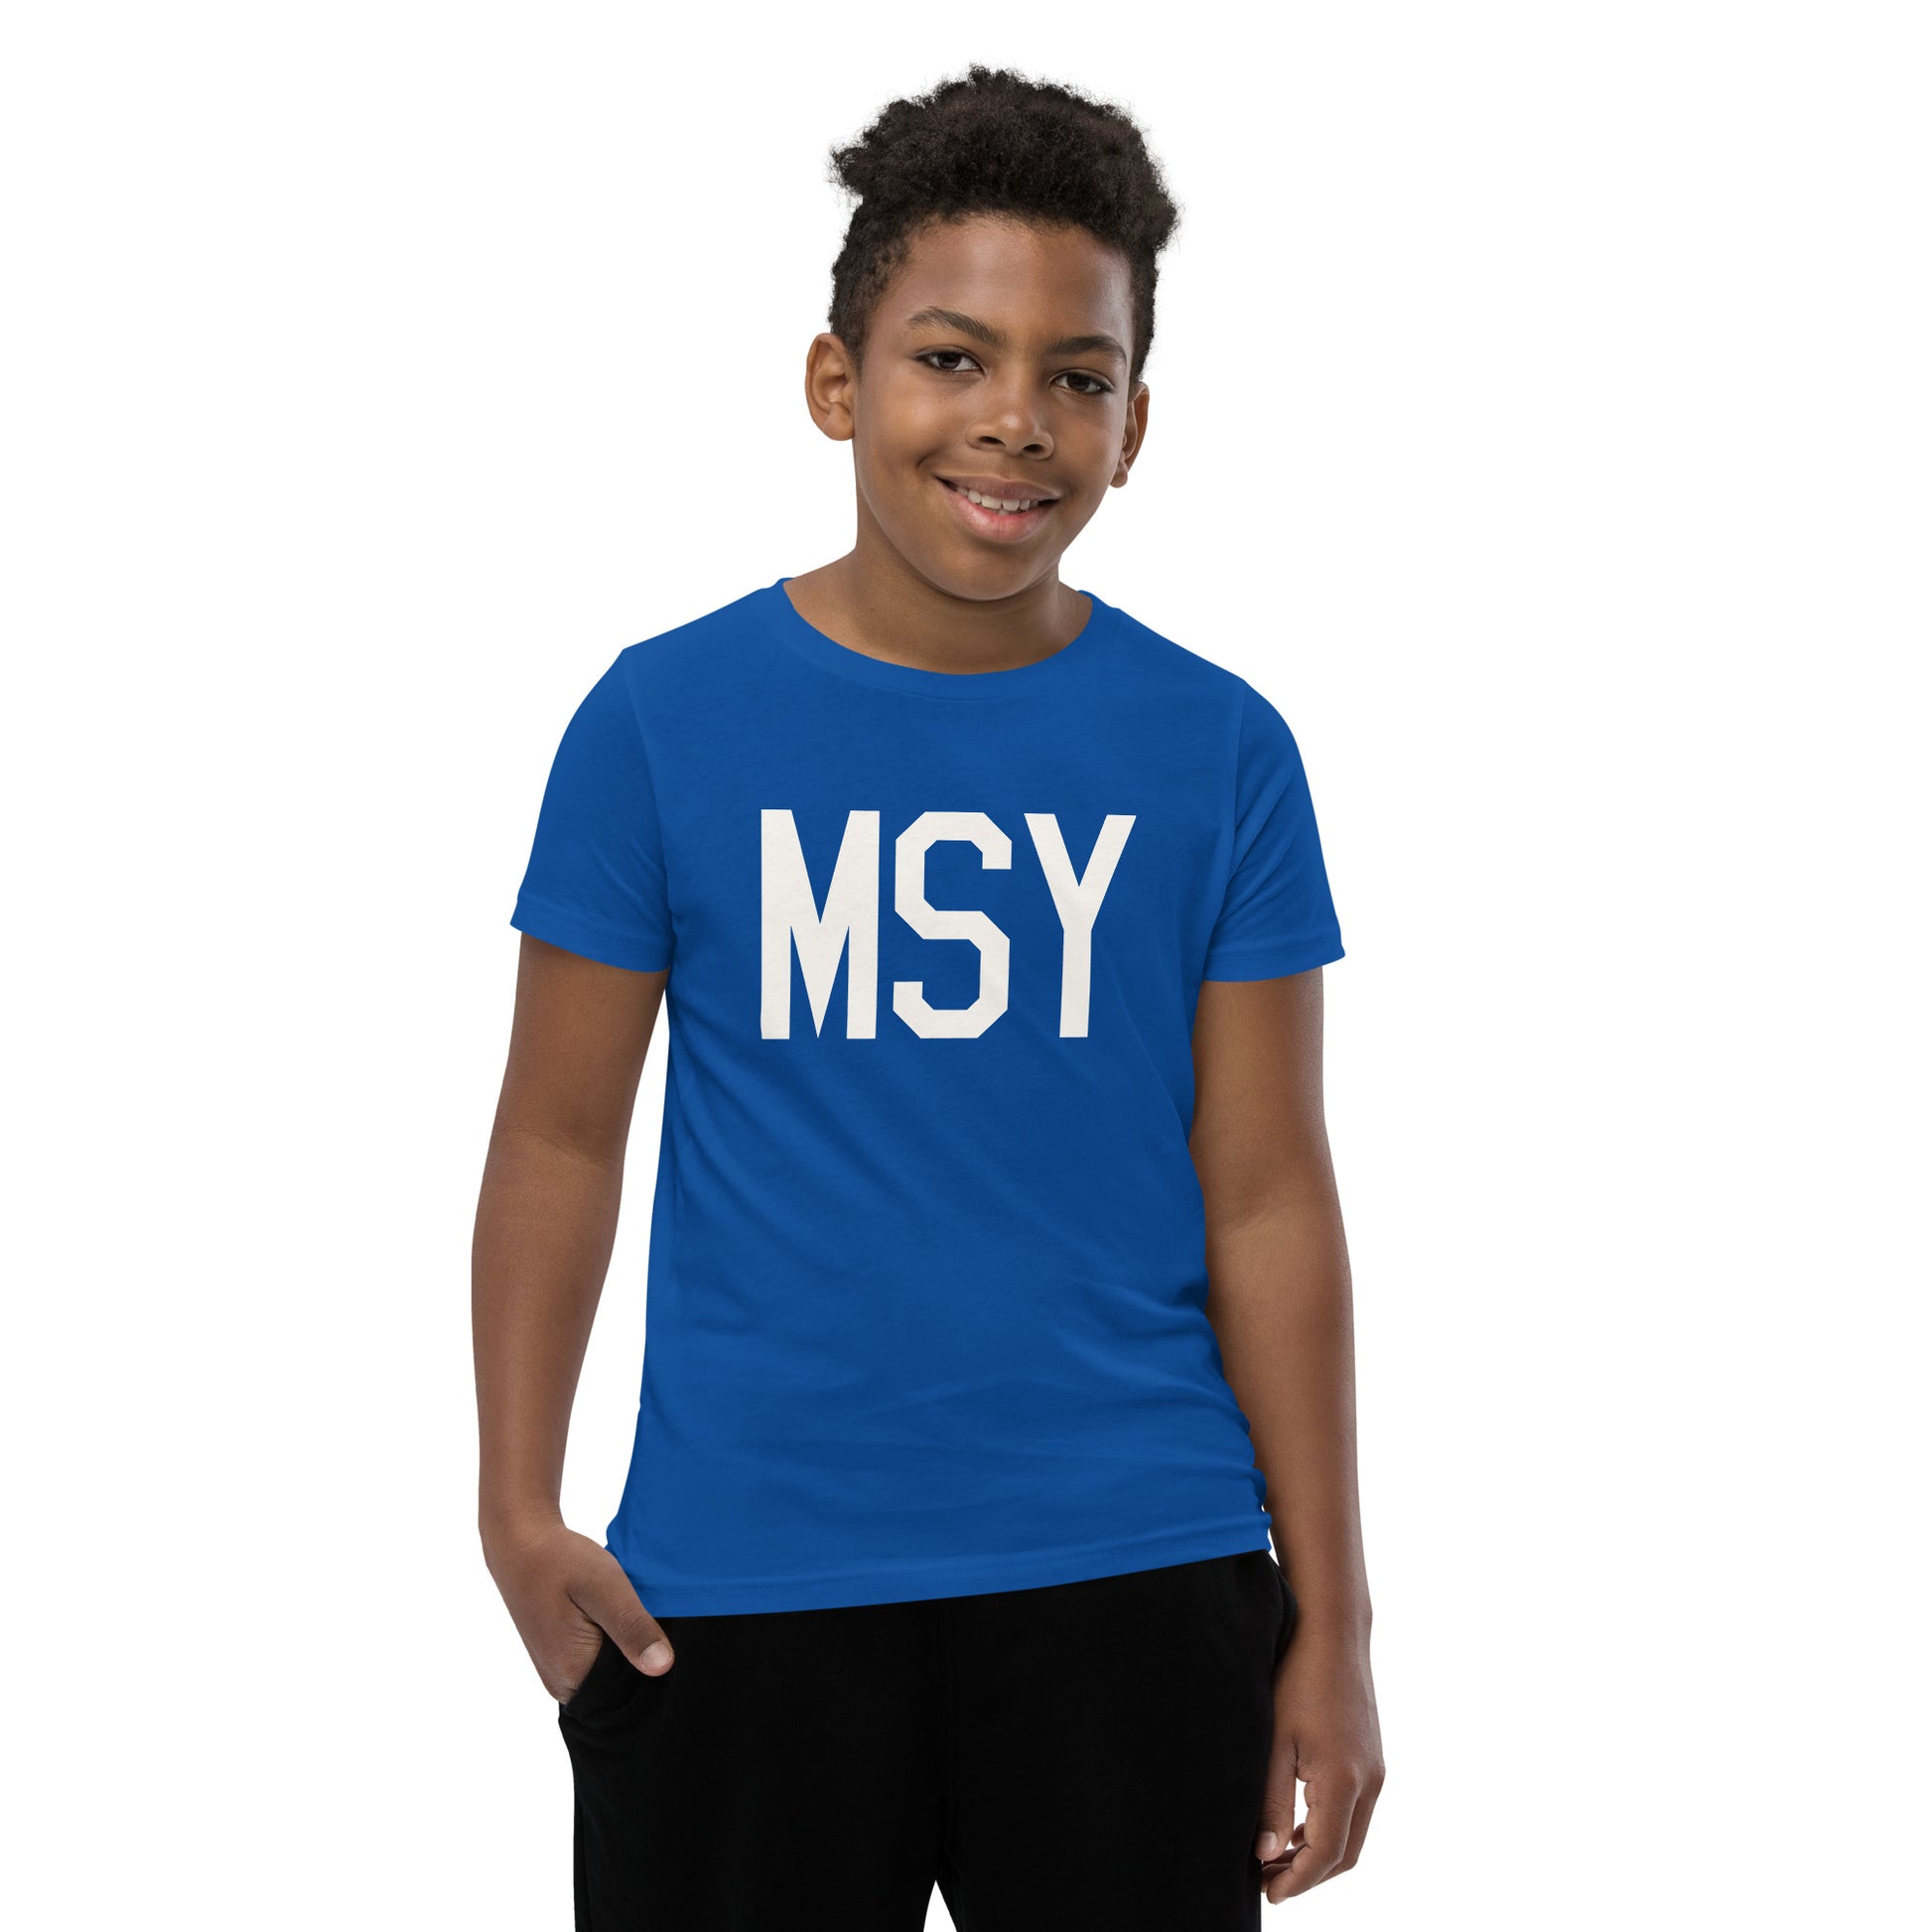 Kid's T-Shirt - White Graphic • MSY New Orleans • YHM Designs - Image 11